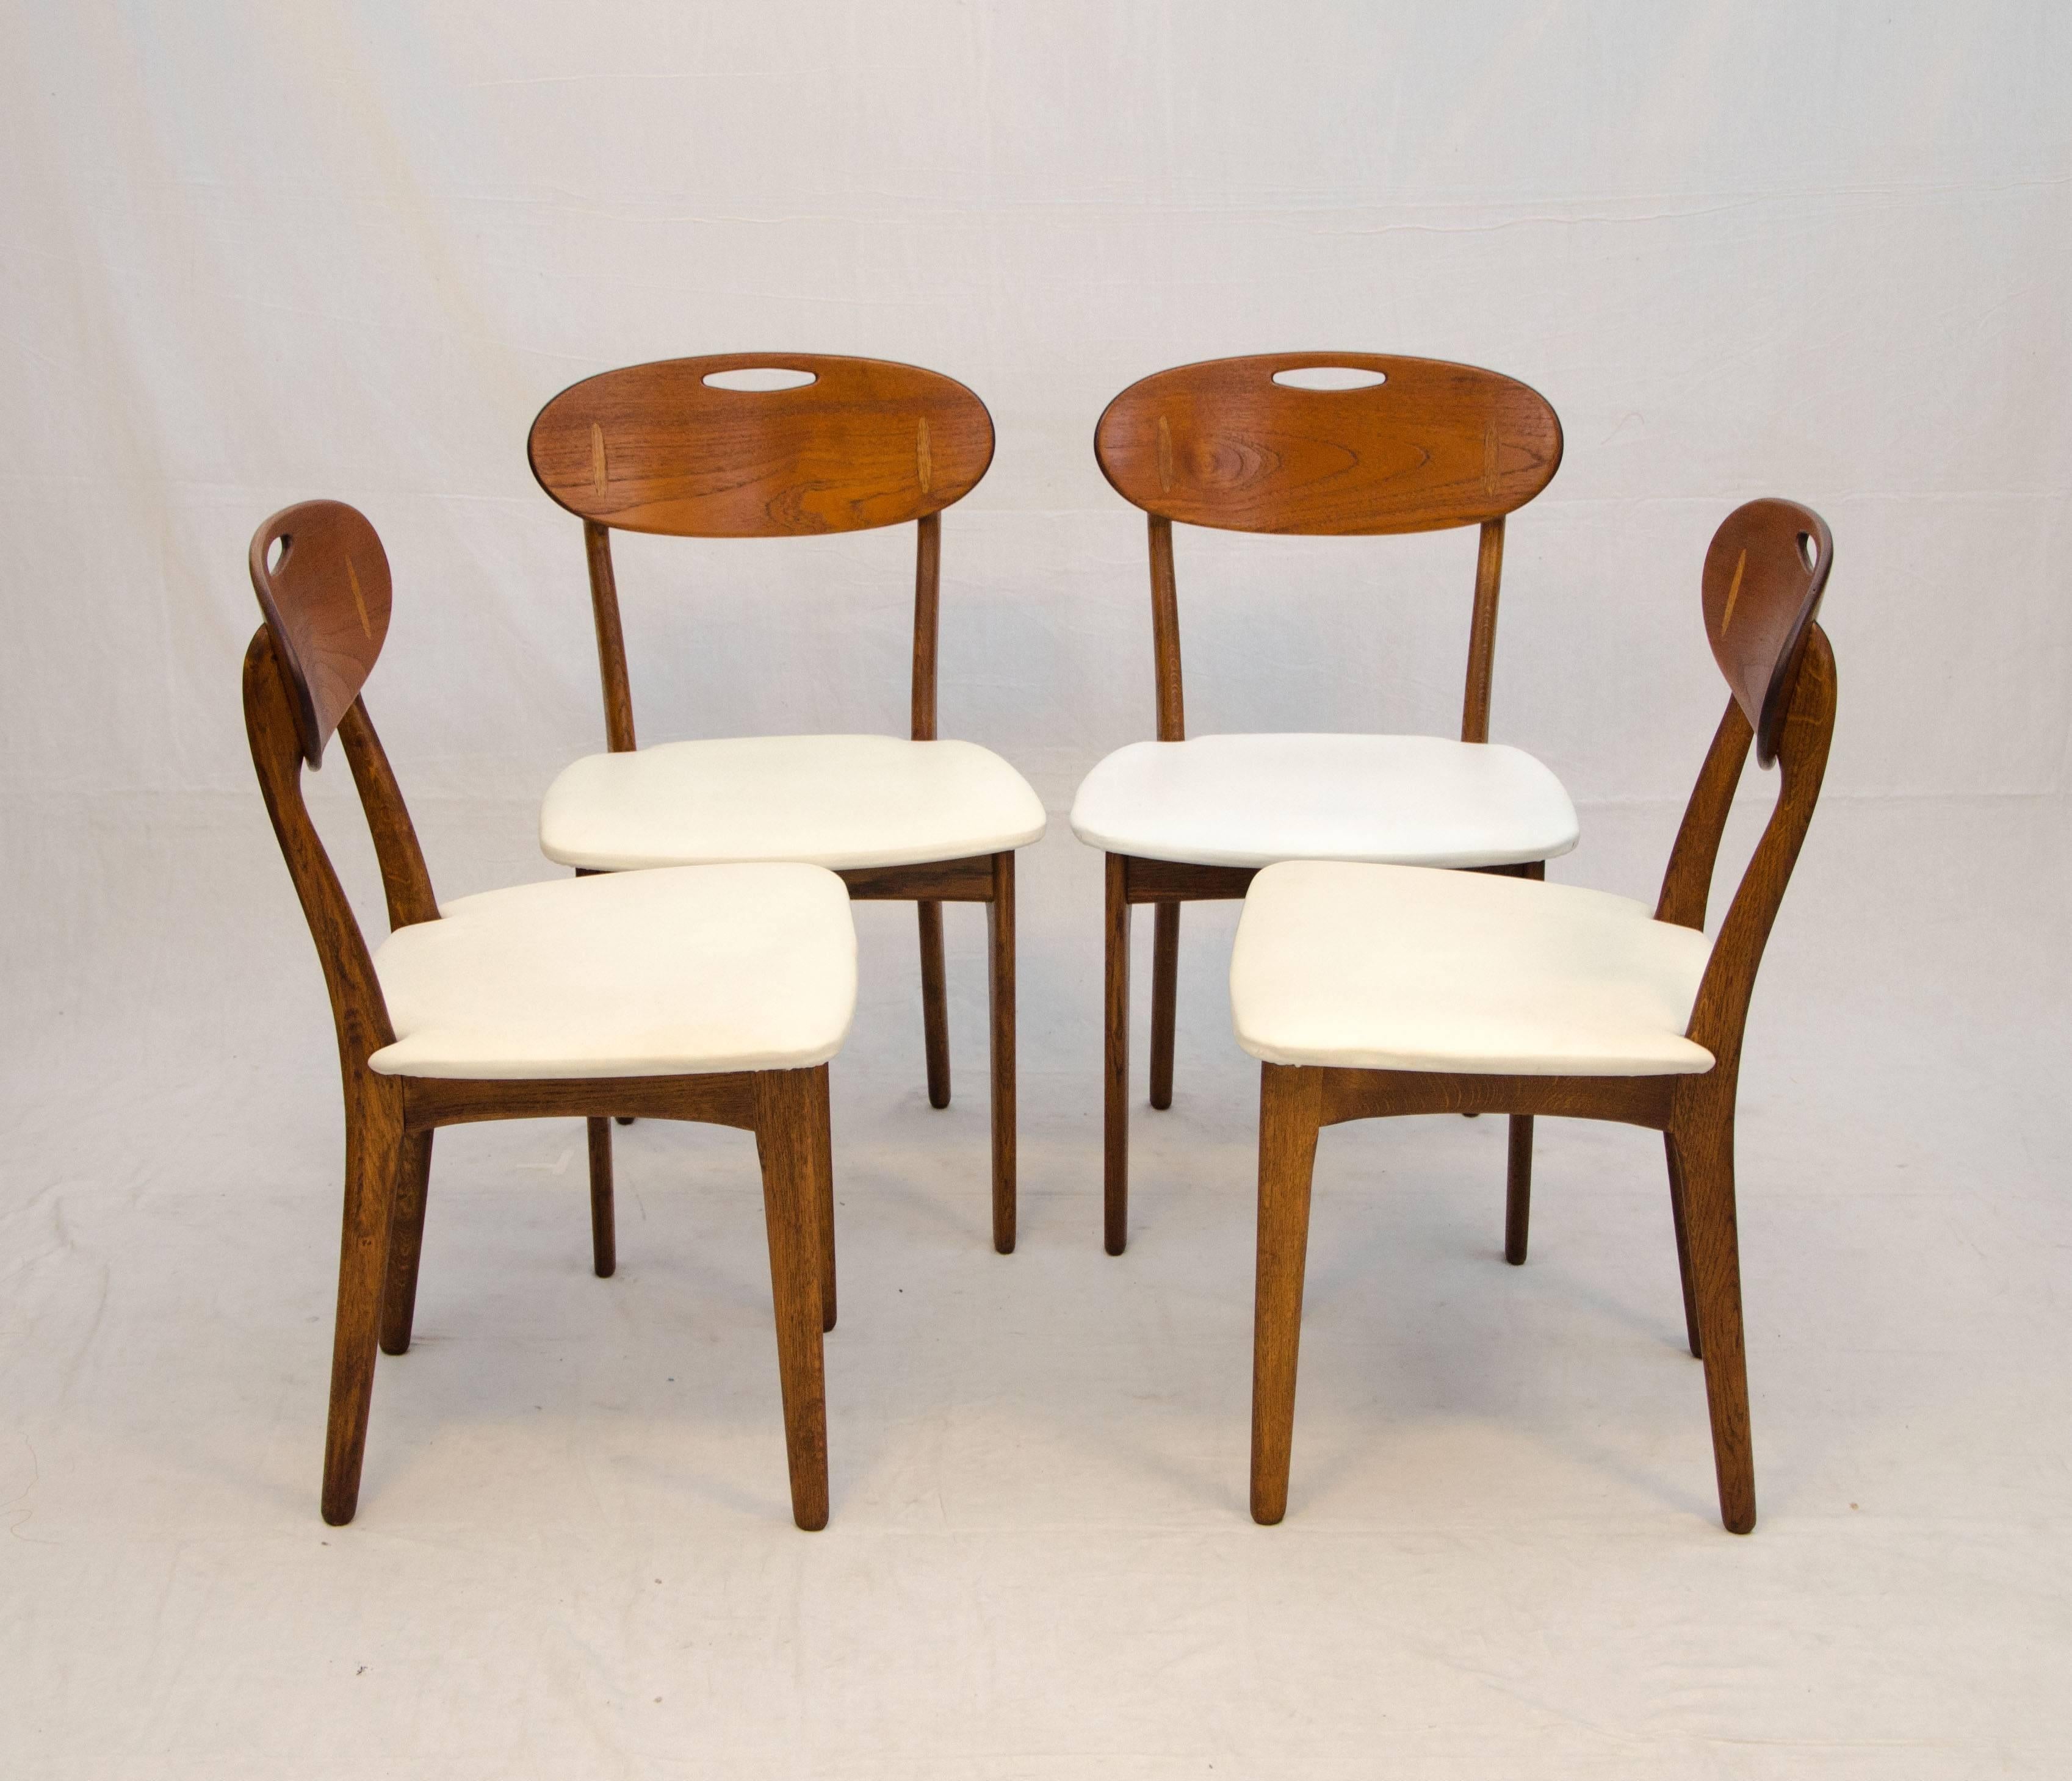 Comfortable and unusual design with a combination of wood types with teak backs, Hans Wegner style oak inserts, and oak chair frames. Retains designer and manufacturer's markings. These chairs are especially easy to move by using the cut-out handle